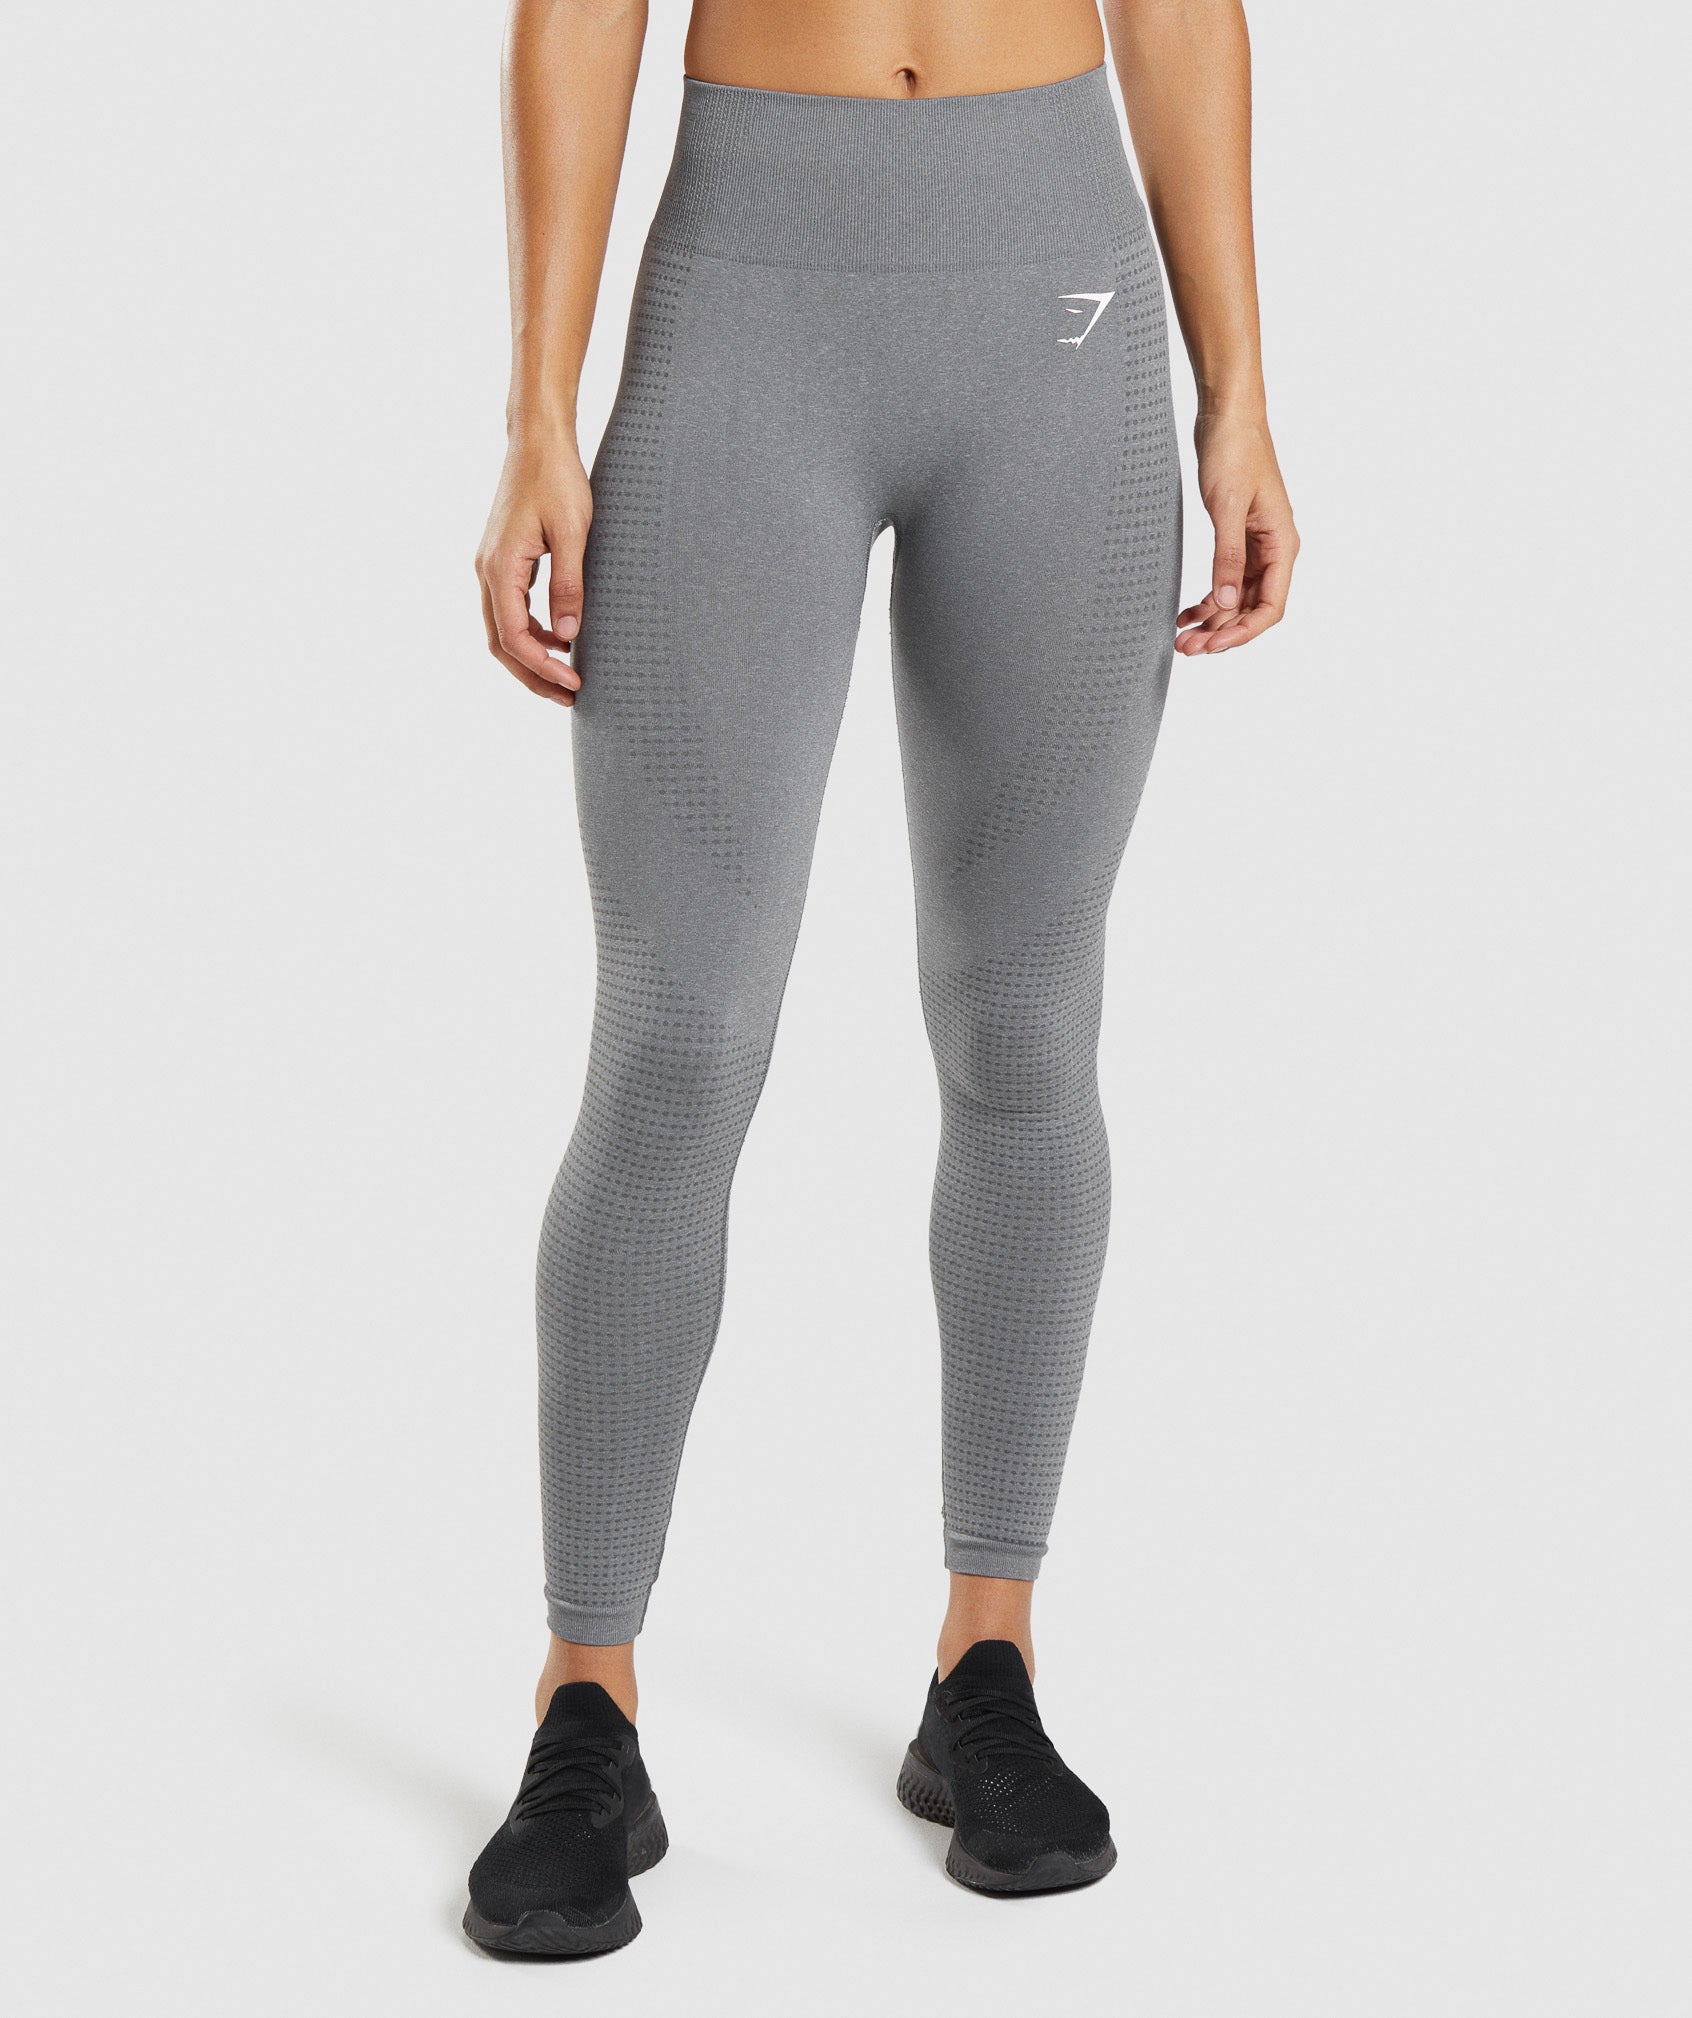 Gymshark Energy Seamless Leggings Women's Mauve Pink Cropped Mid Rise - $15  - From Destiny